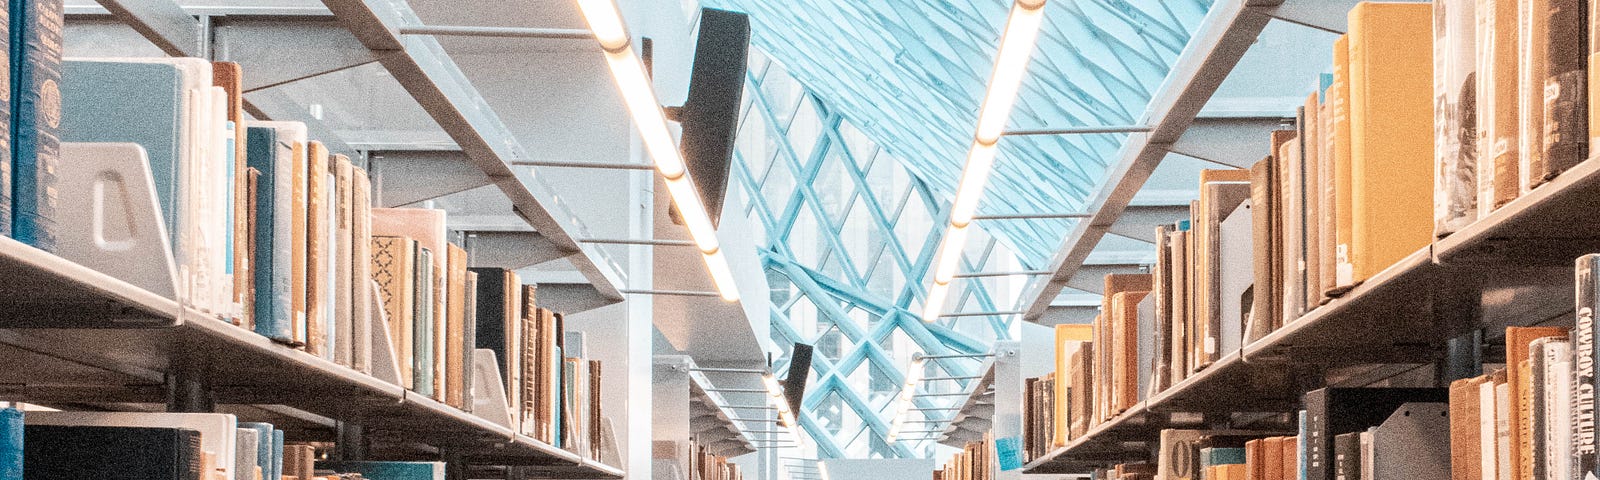 a light filled library